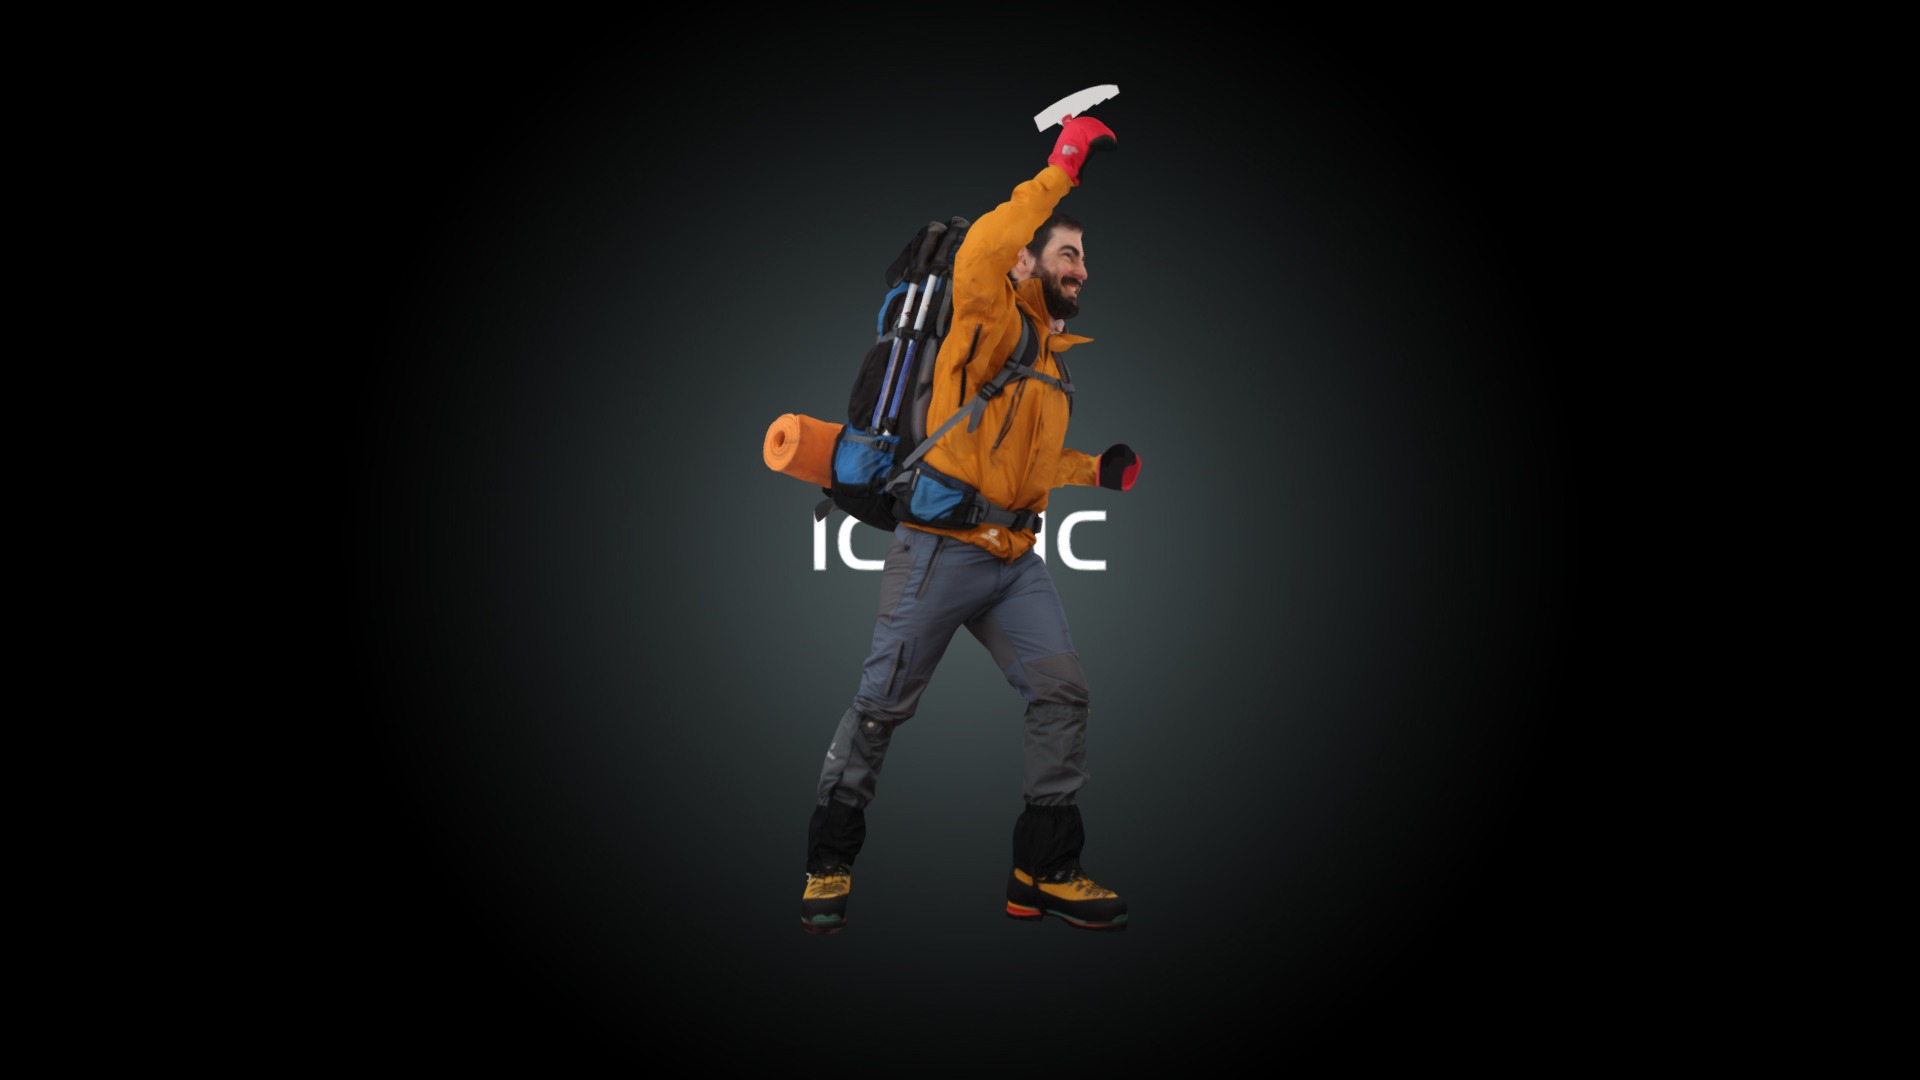 3D model Climber - This is a 3D model of the Climber. The 3D model is about a person in an orange jacket and blue pants holding a white and black object.